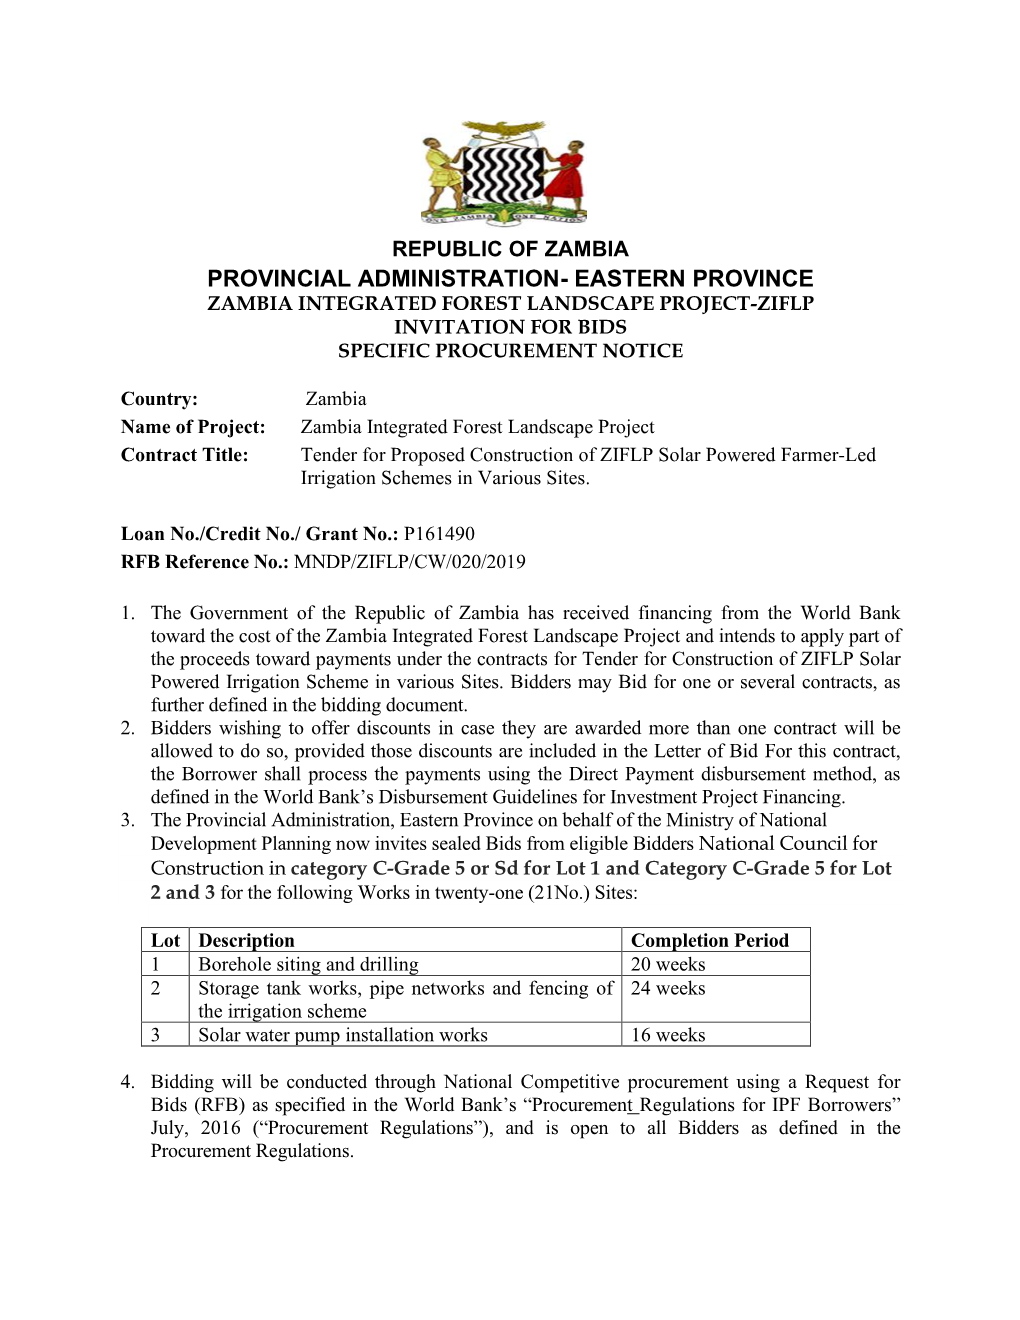 Provincial Administration- Eastern Province Zambia Integrated Forest Landscape Project-Ziflp Invitation for Bids Specific Procurement Notice